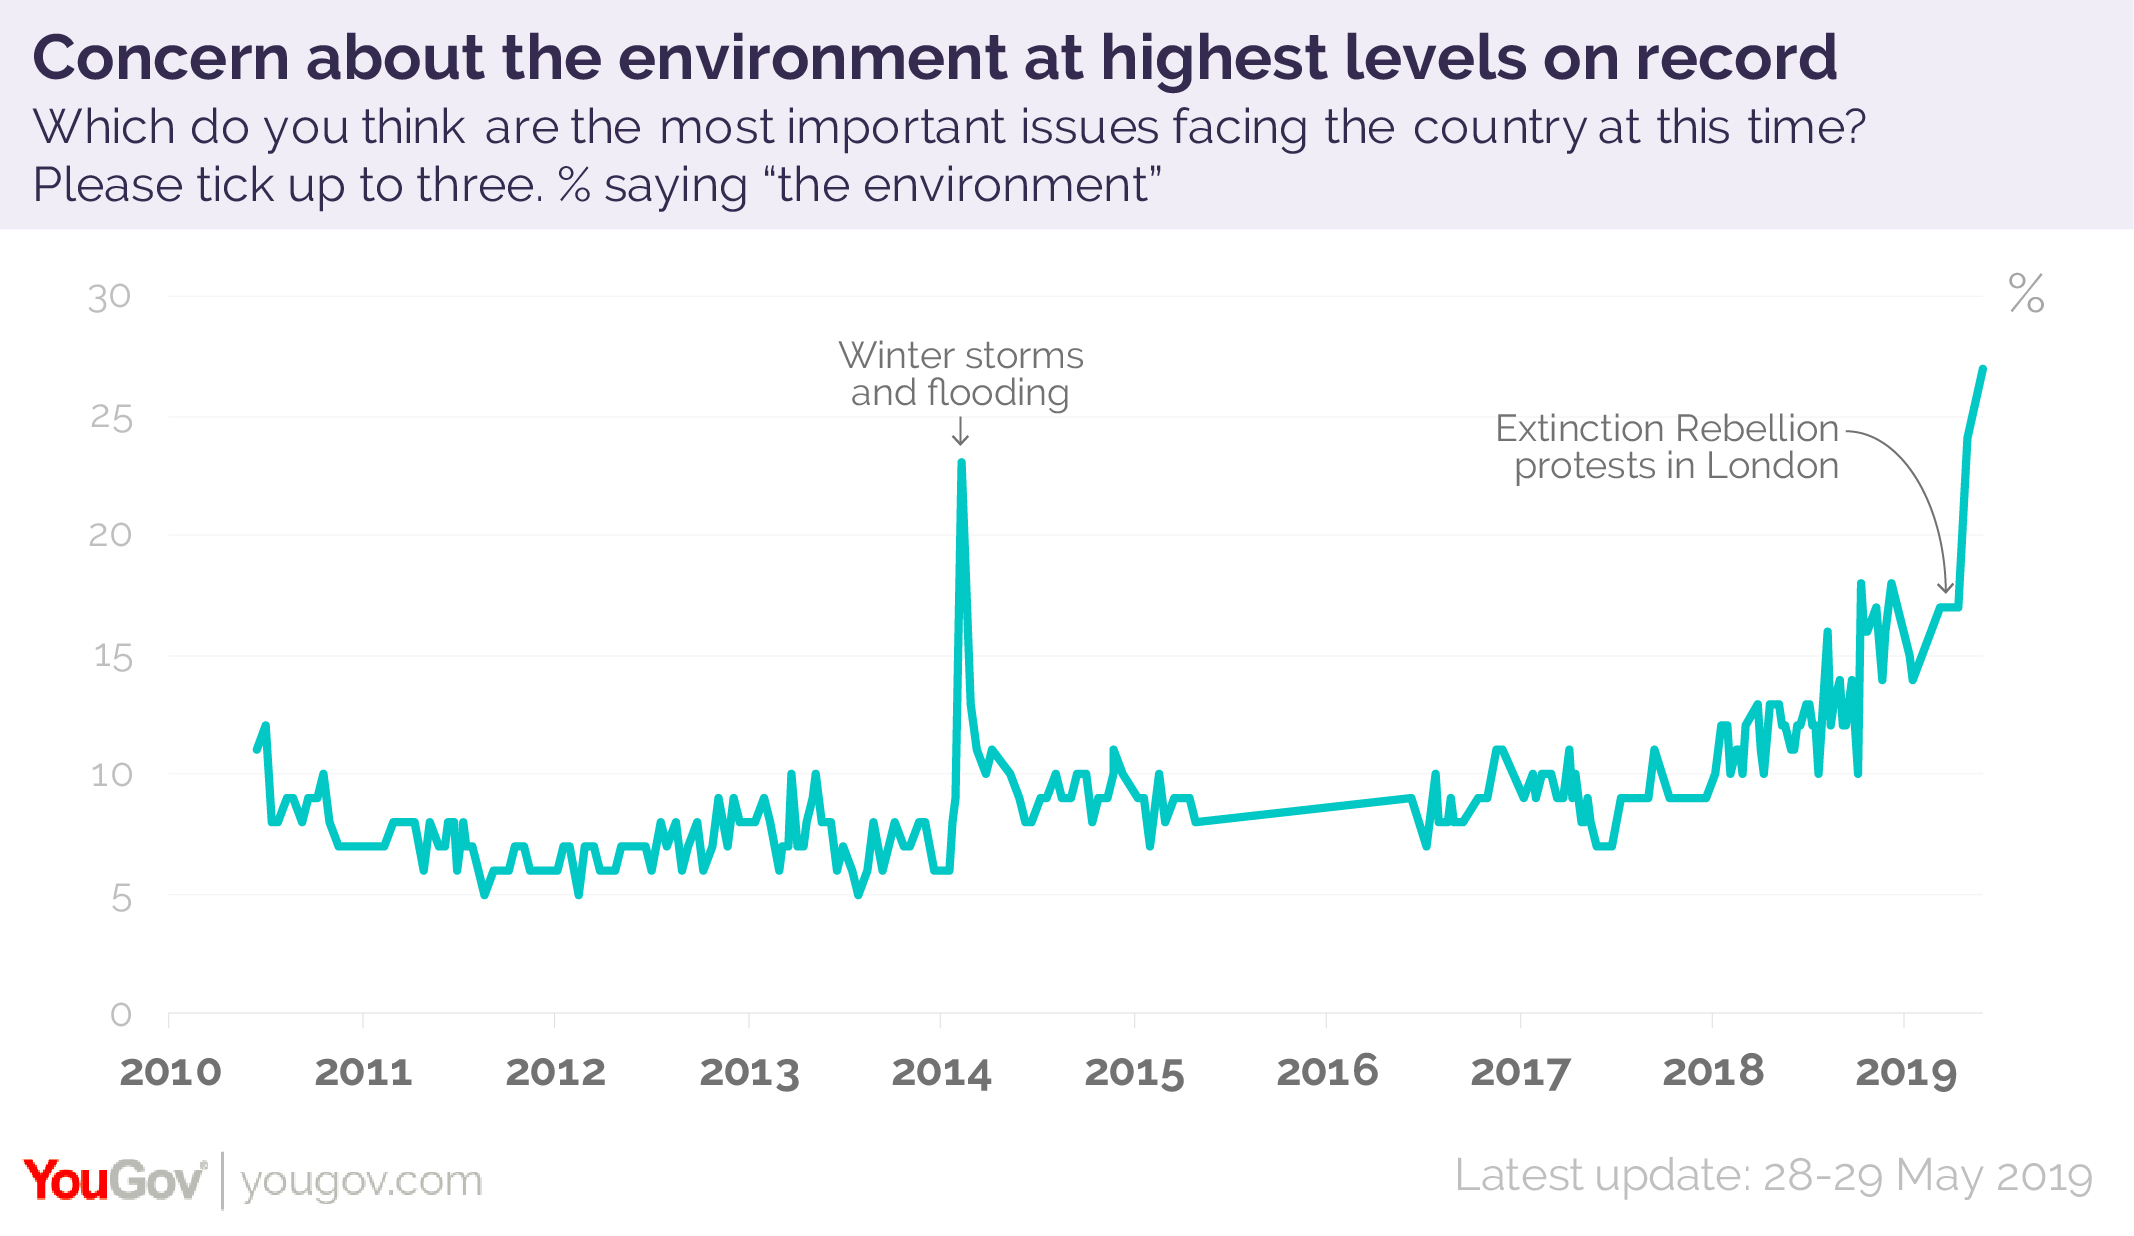 Concern for the environment at record highs | YouGov